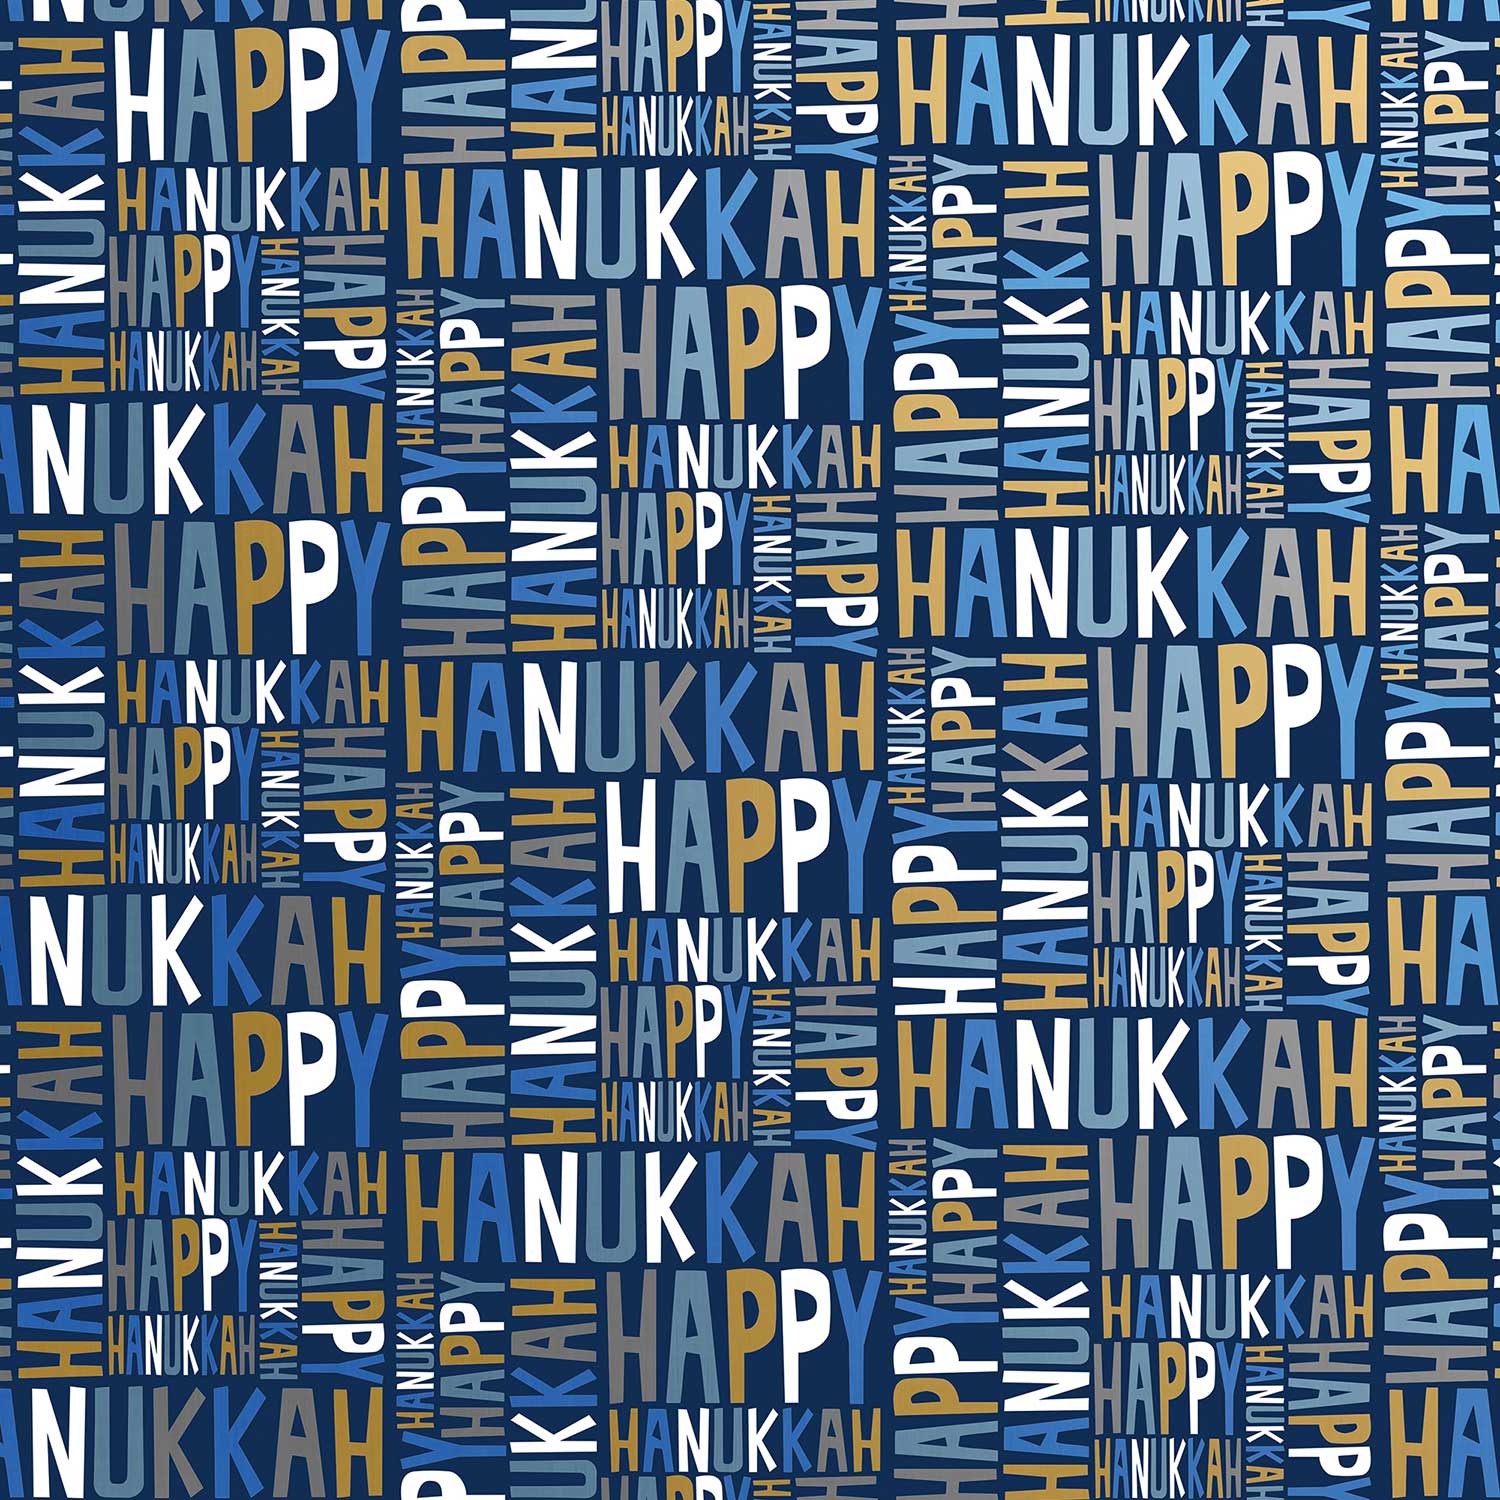 XB671a Hanukkah Greetings Gift Wrapping Paper Swatch 